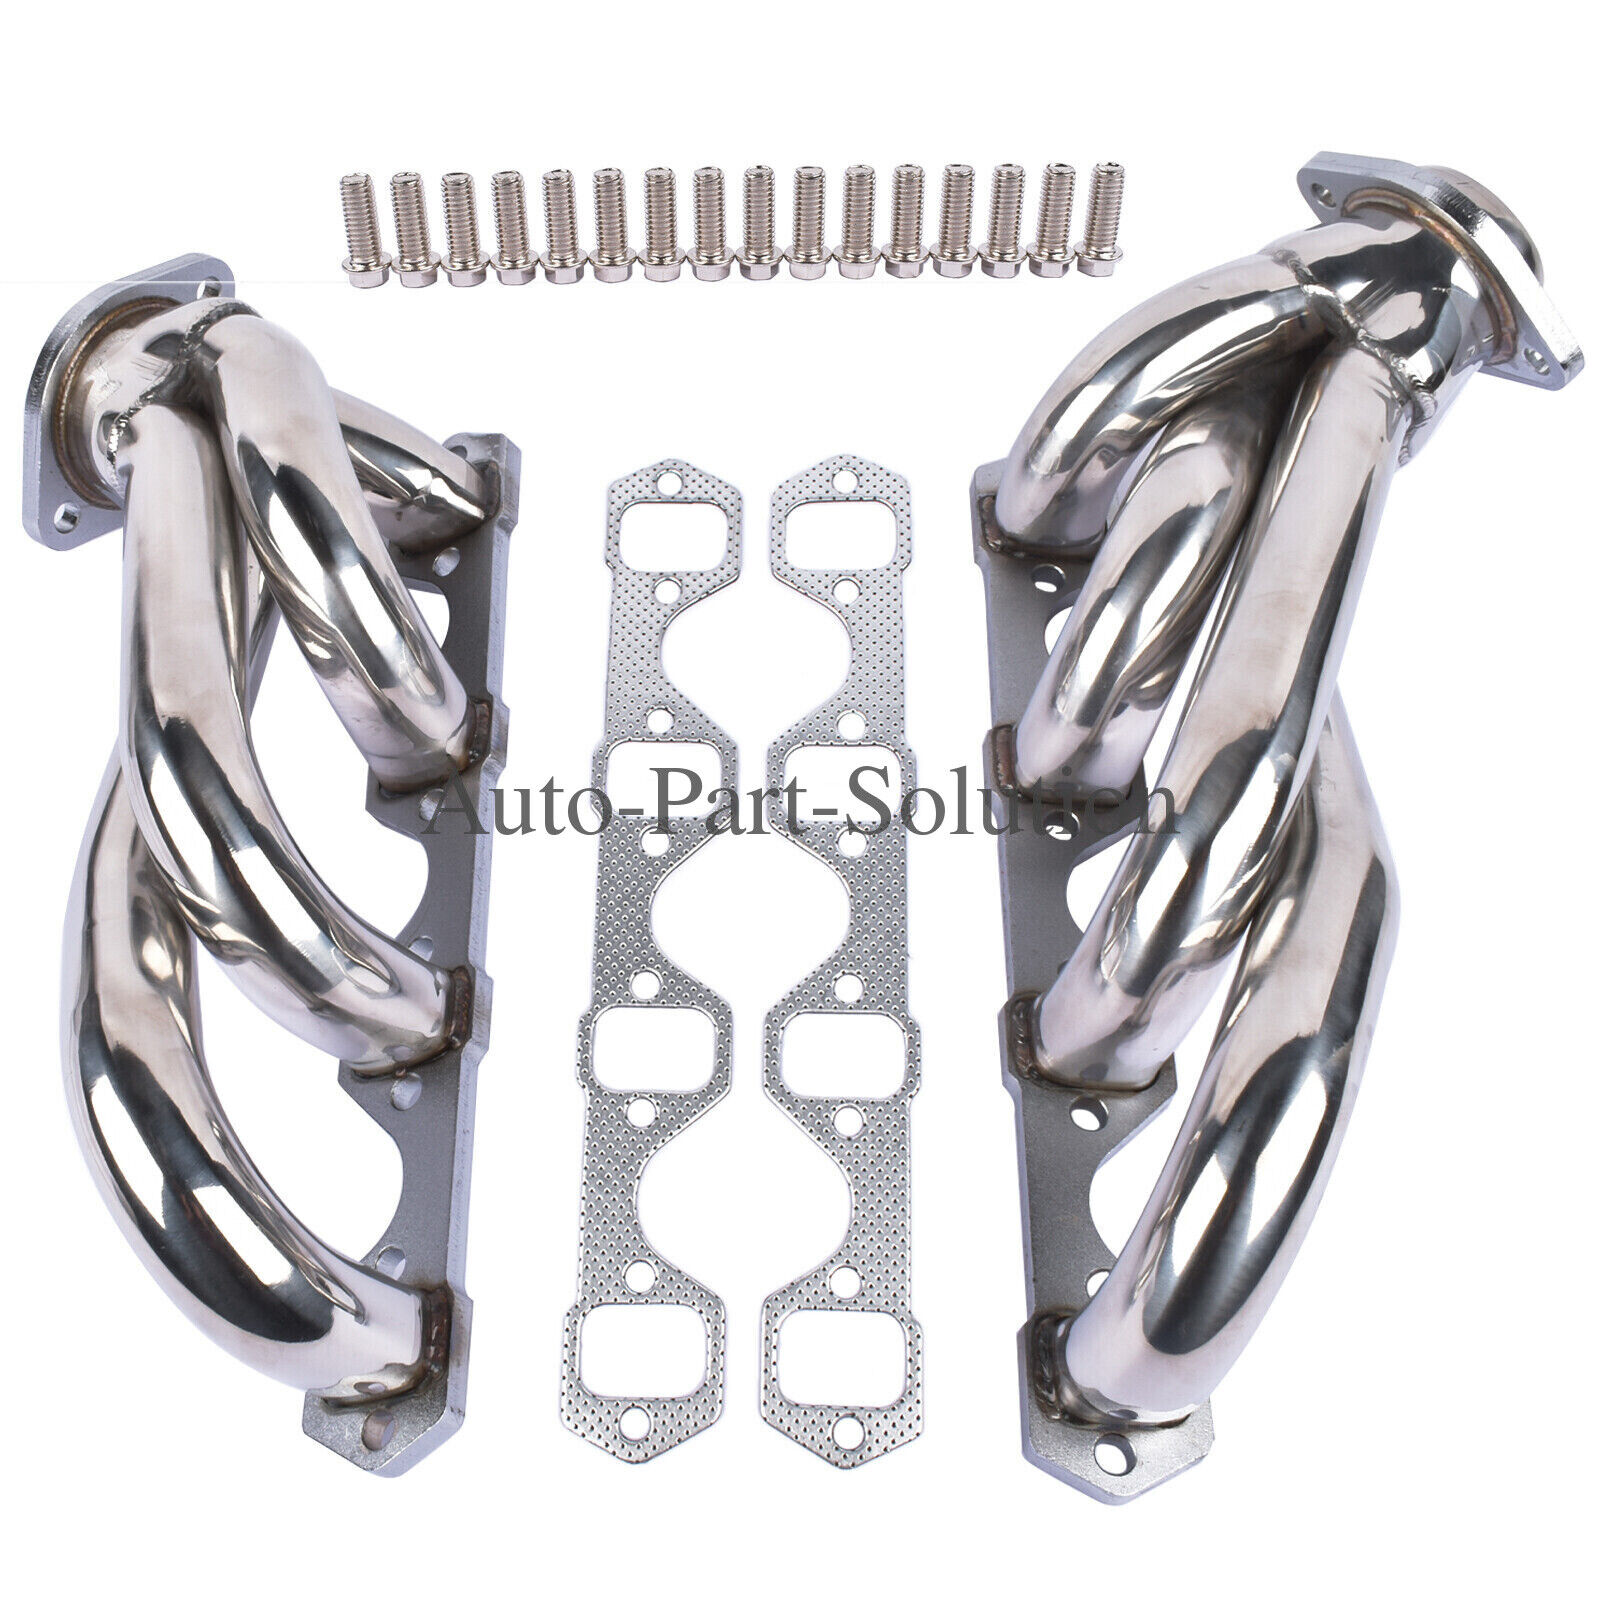 Stainless Steel Exhaust Manifold Headers for 1979-1993 Mustang 5.0 V8 GT/LX/SVT